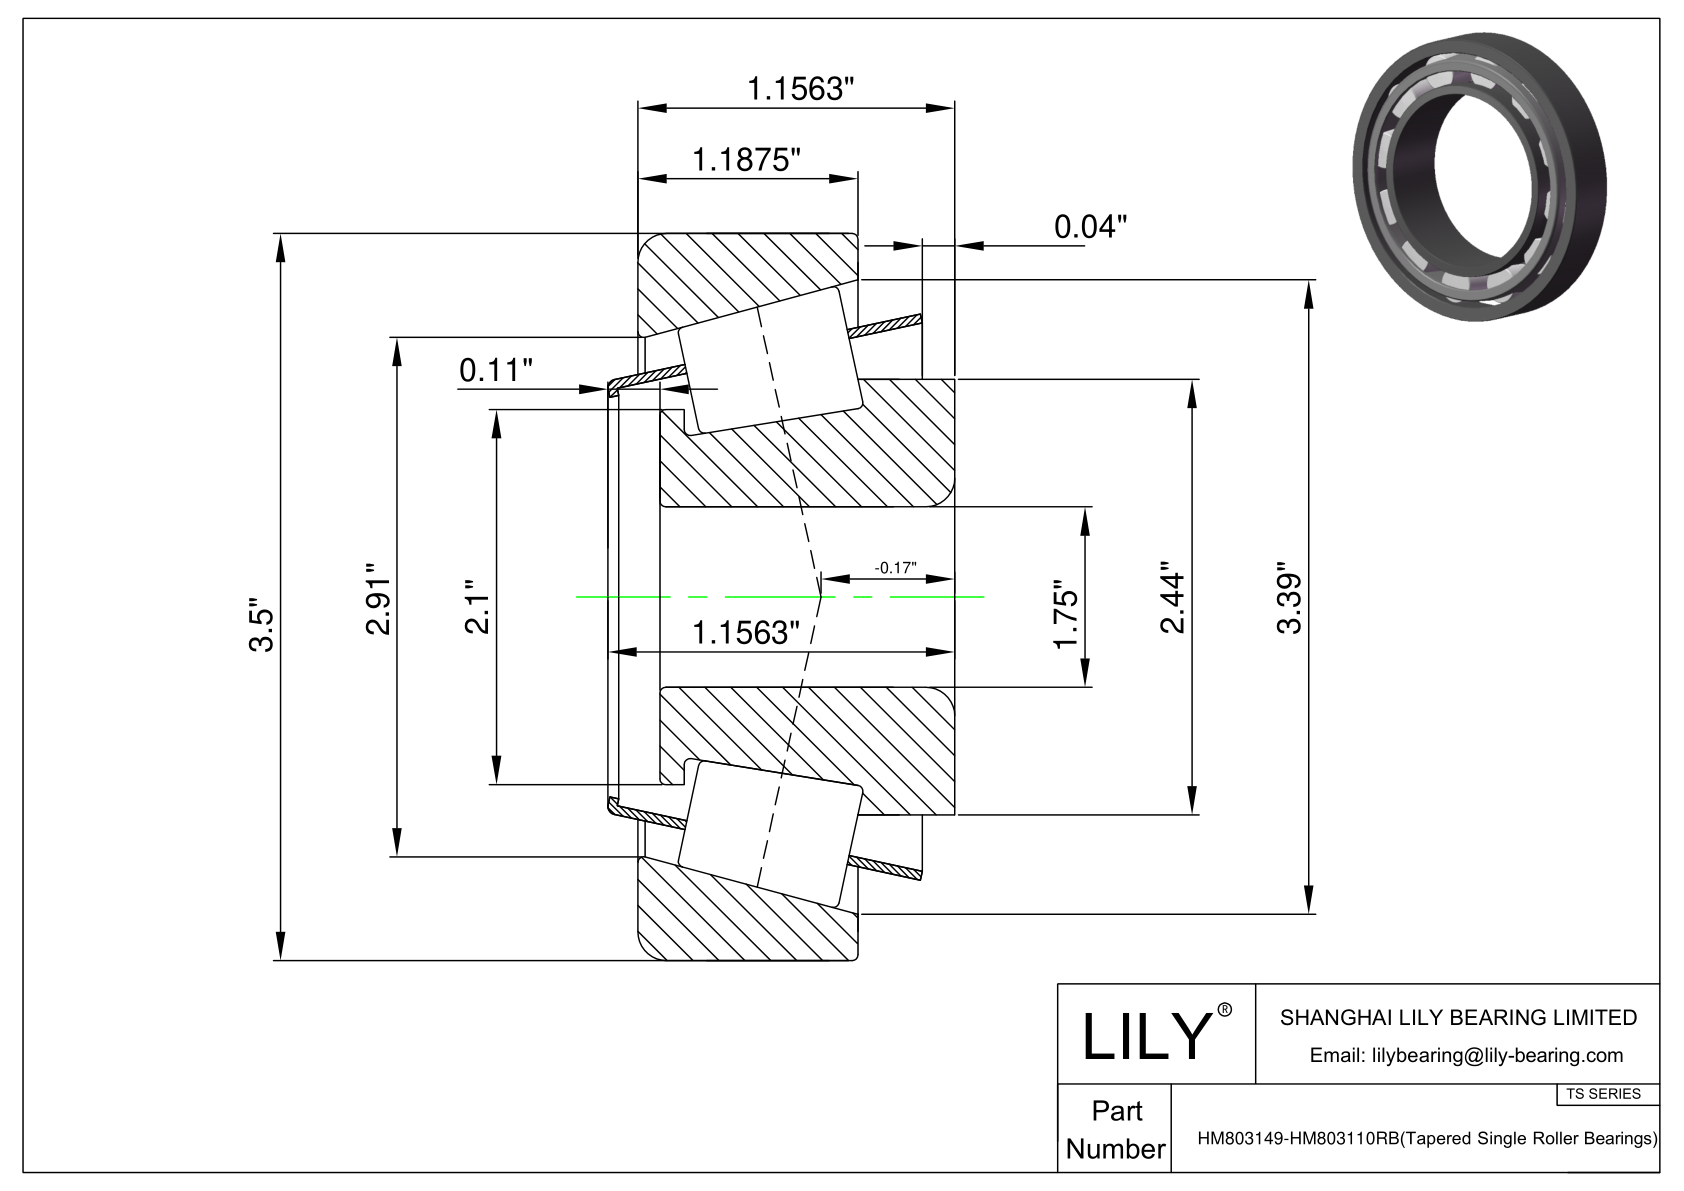 HM803149-HM803110RB TS (Tapered Single Roller Bearings) (Imperial) cad drawing